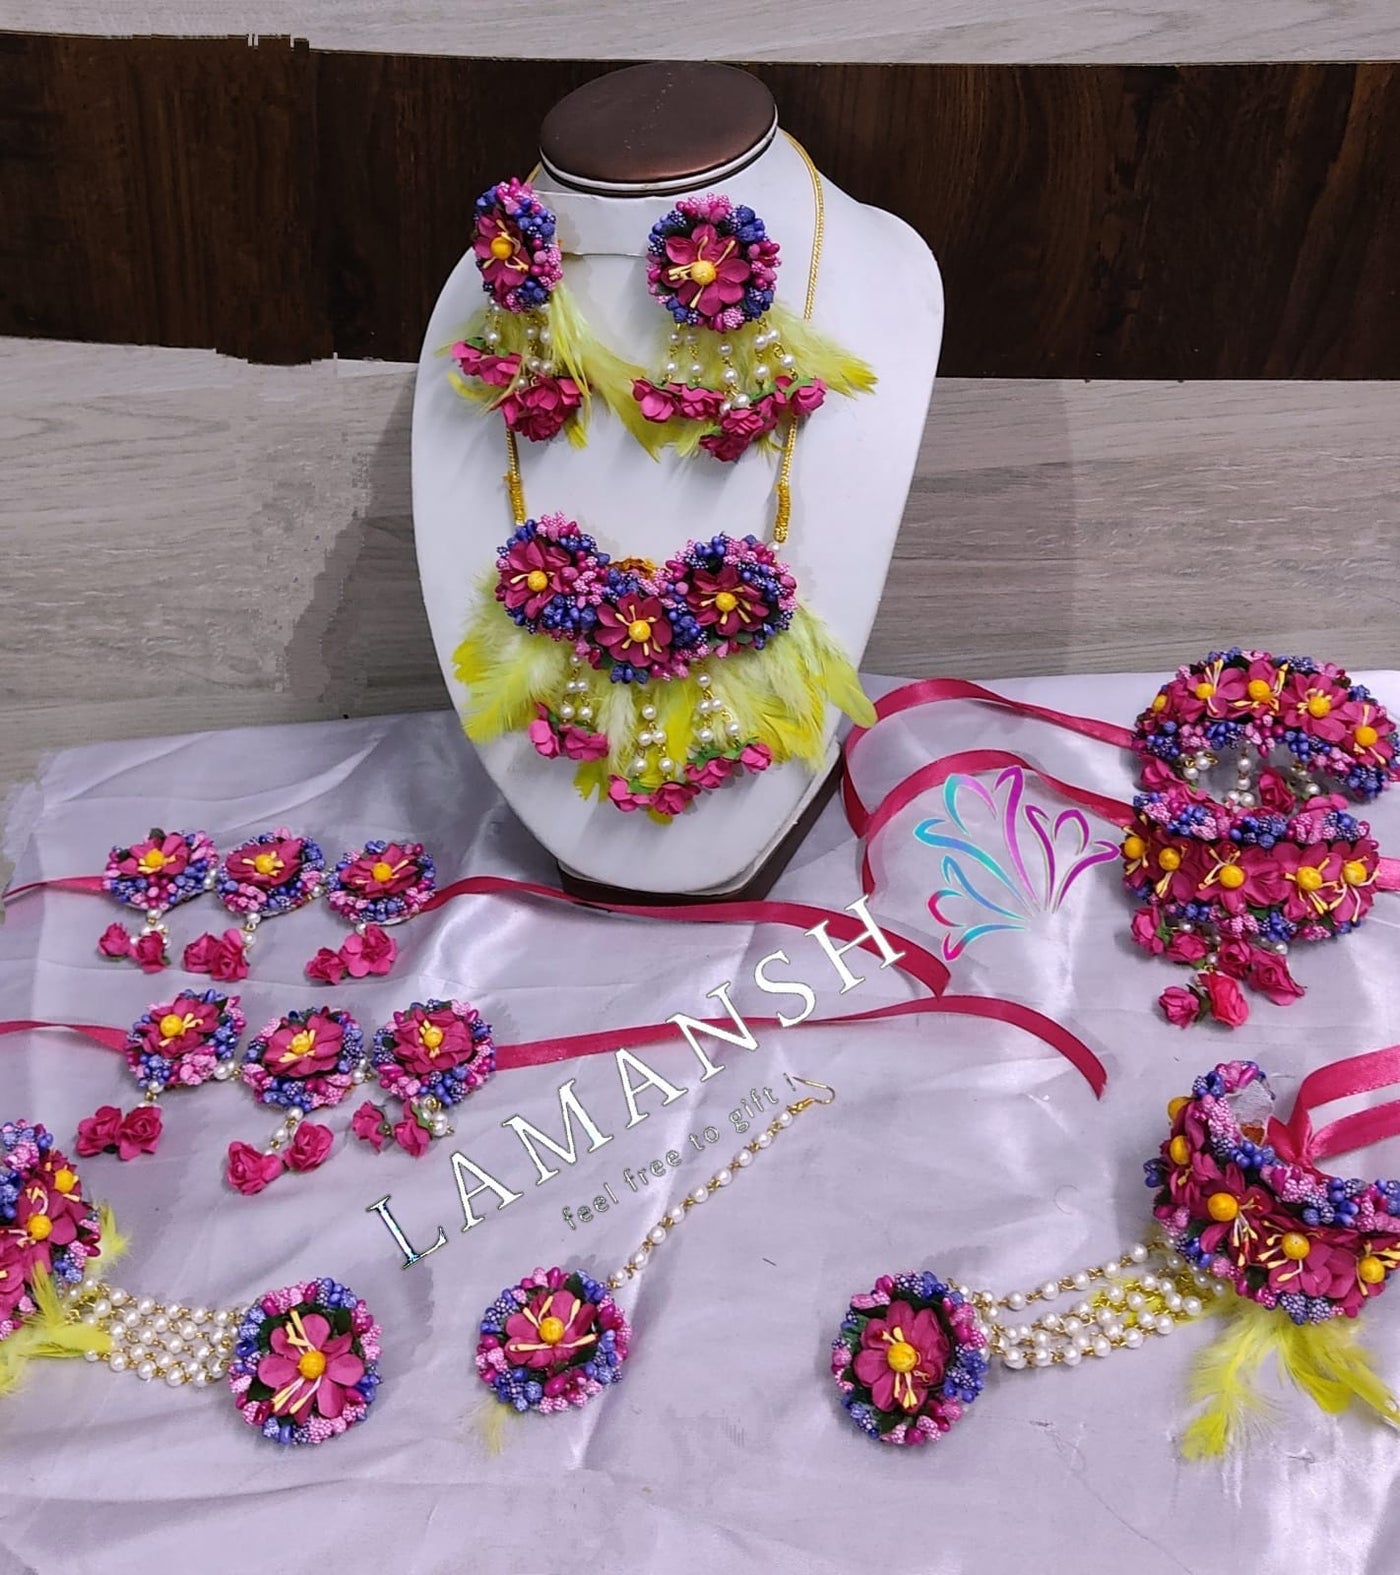 Lamansh Flower 🌺 Jewellery 1 Necklace, 2 Earrings ,1 Maangtika, 2 Bracelets Attached with Ring set, 2 Bajuband & 2 Payal / Pink-Purple LAMANSH® Bridal Floral 🌺 Jewellery Set for Baby Shower / Godbharai / Dohale Jevan Function